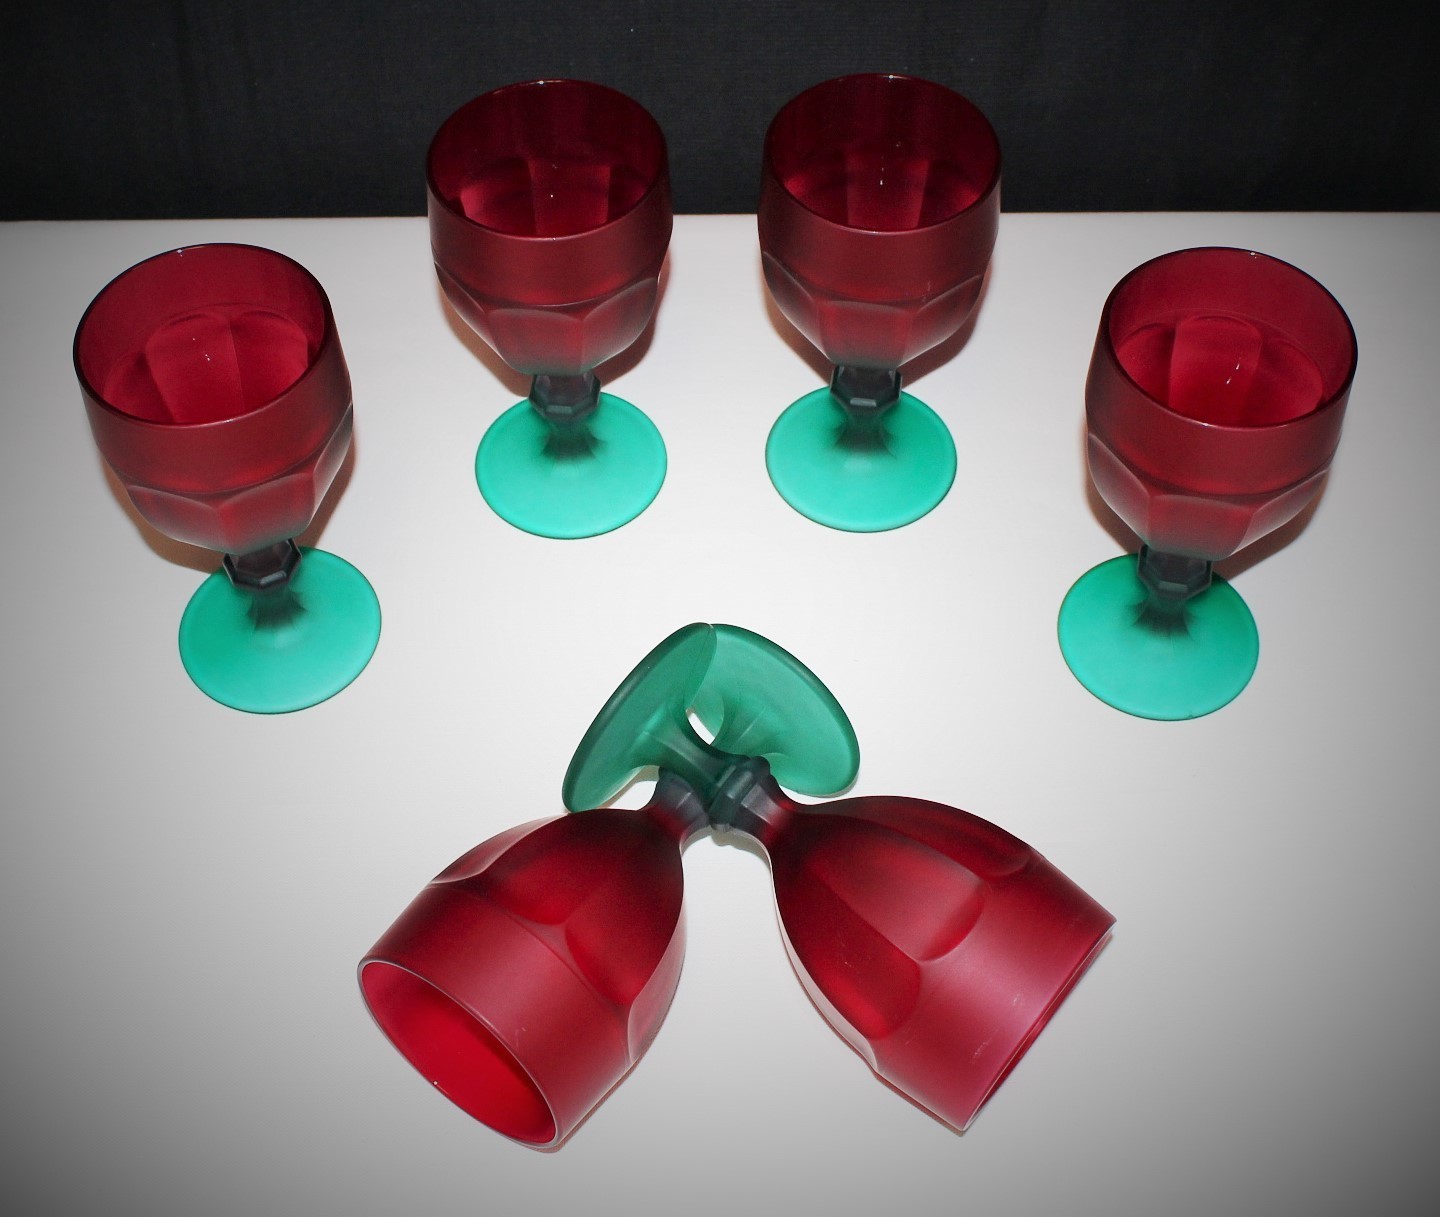 Set of 6 Libbey Duratuff Frosted Red Green Satin Finish 6 3/4" Stem Glass Goblets